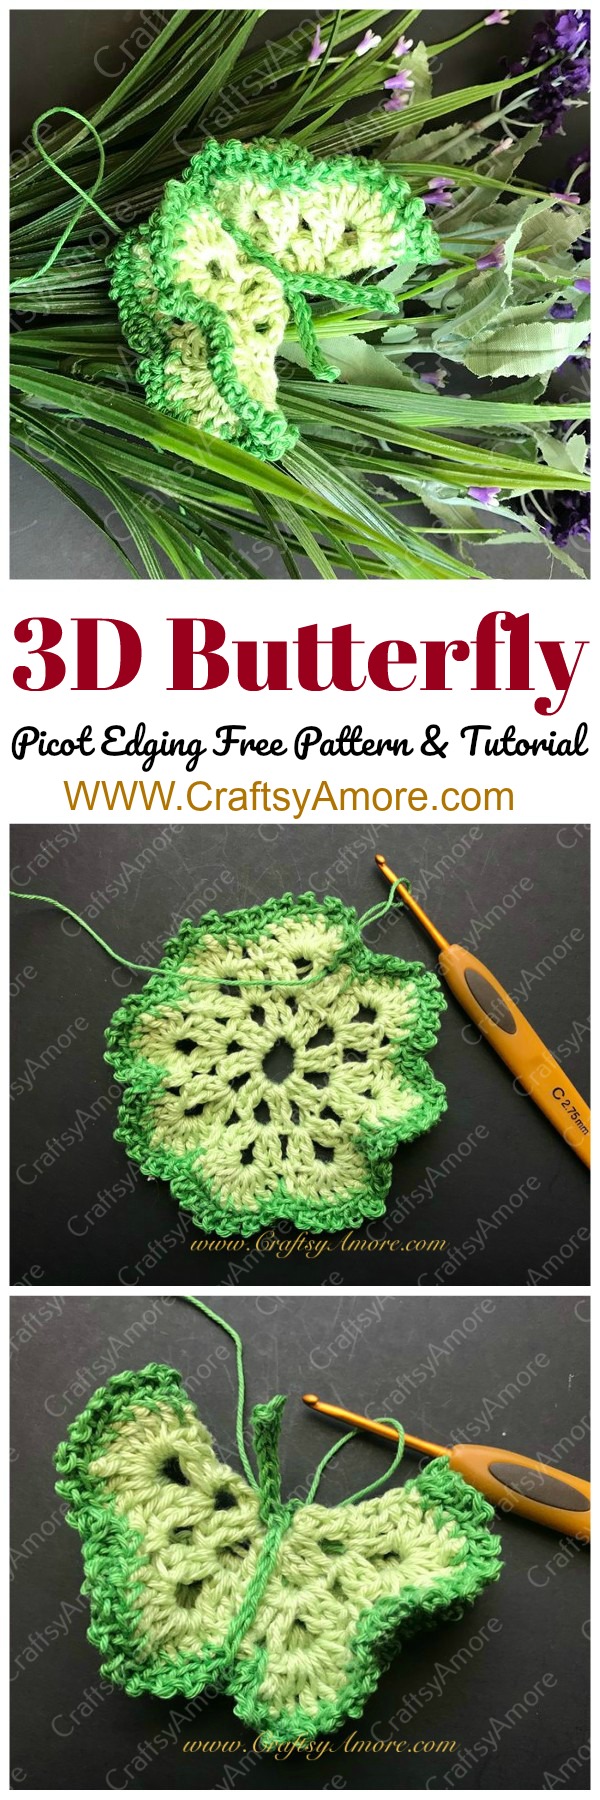 Crochet 3D Butterfly with Picot Edging Free Pattern & Step by Step Tutorial Pin